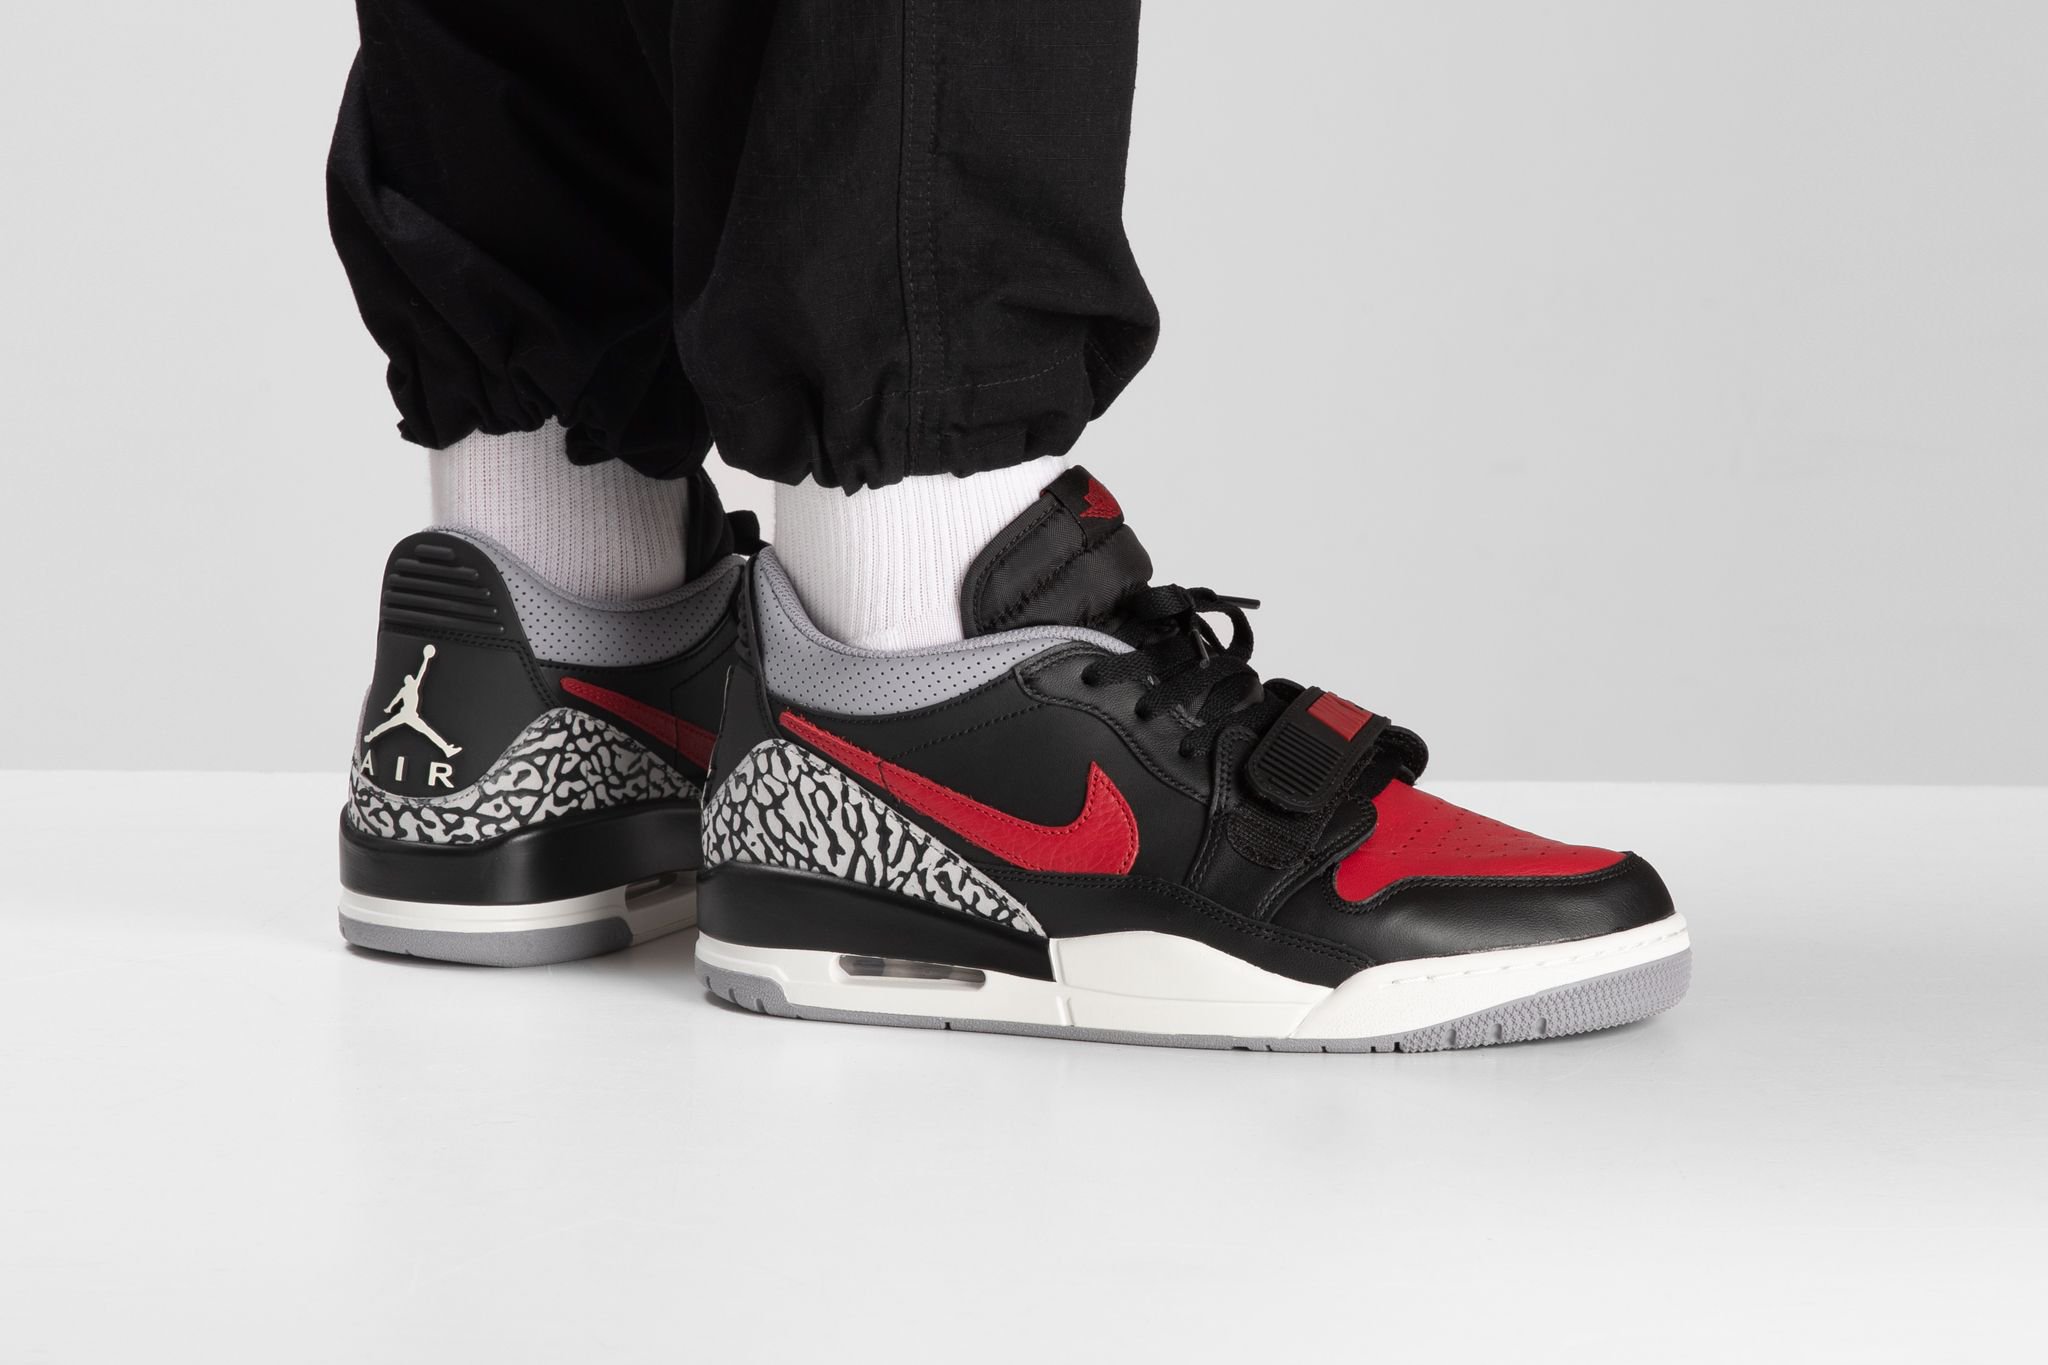 Titolo Air Jordan Legacy 312 Low In Black Varsity Red Black Cement Grey Are Now Available For Purchase Here T Co Meeyjefhky Us 8 41 Us 12 46 Style Code Cd7069 006